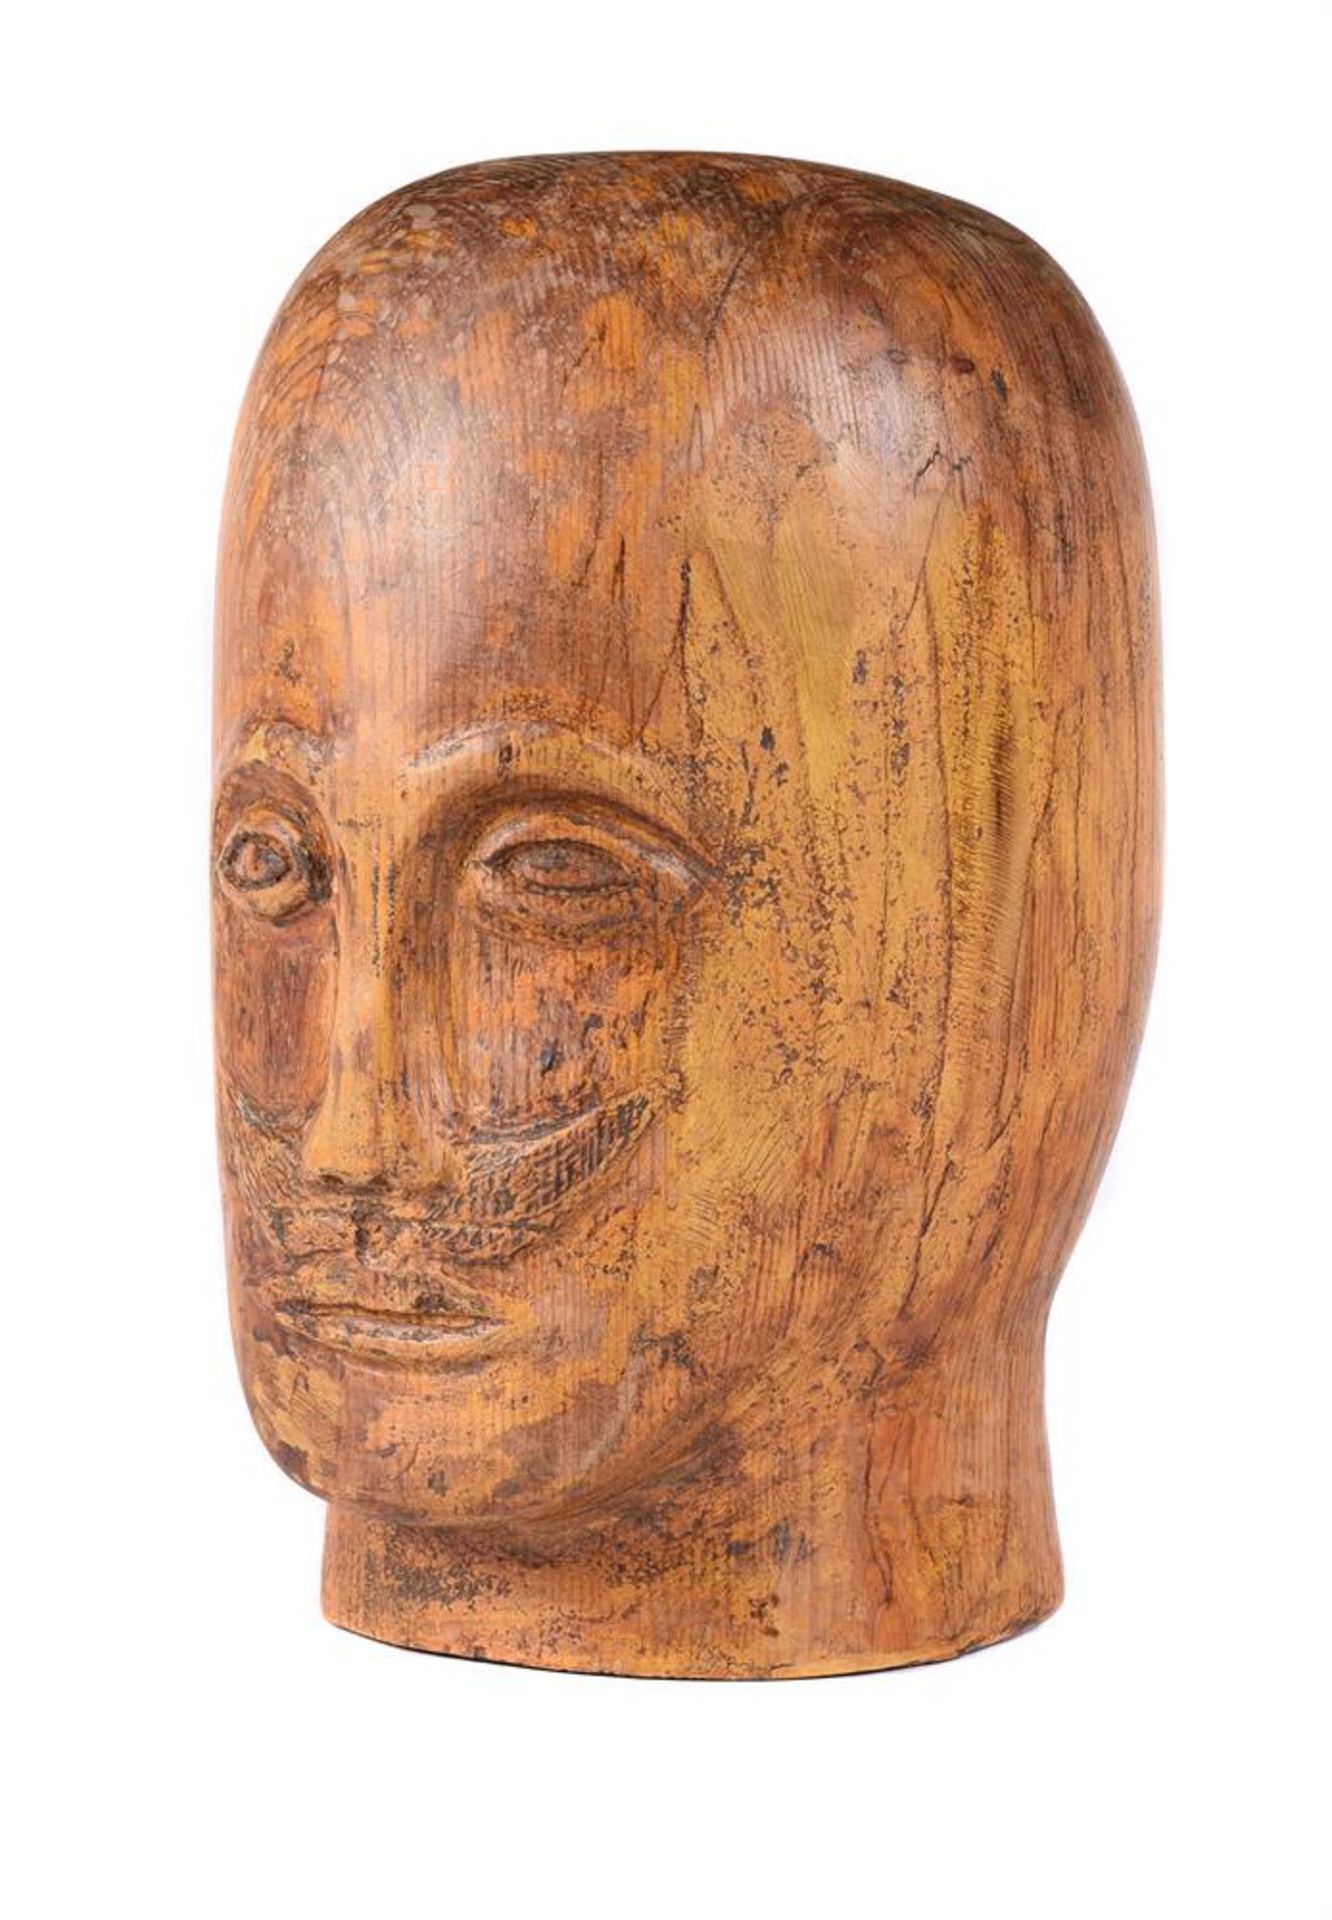 A CARVED PINE MILLINER'S BLOCK IN THE FORM OF A MOUSTACHIOED MAN, LATE 19TH/EARLY 20TH CENTURY - Image 2 of 5